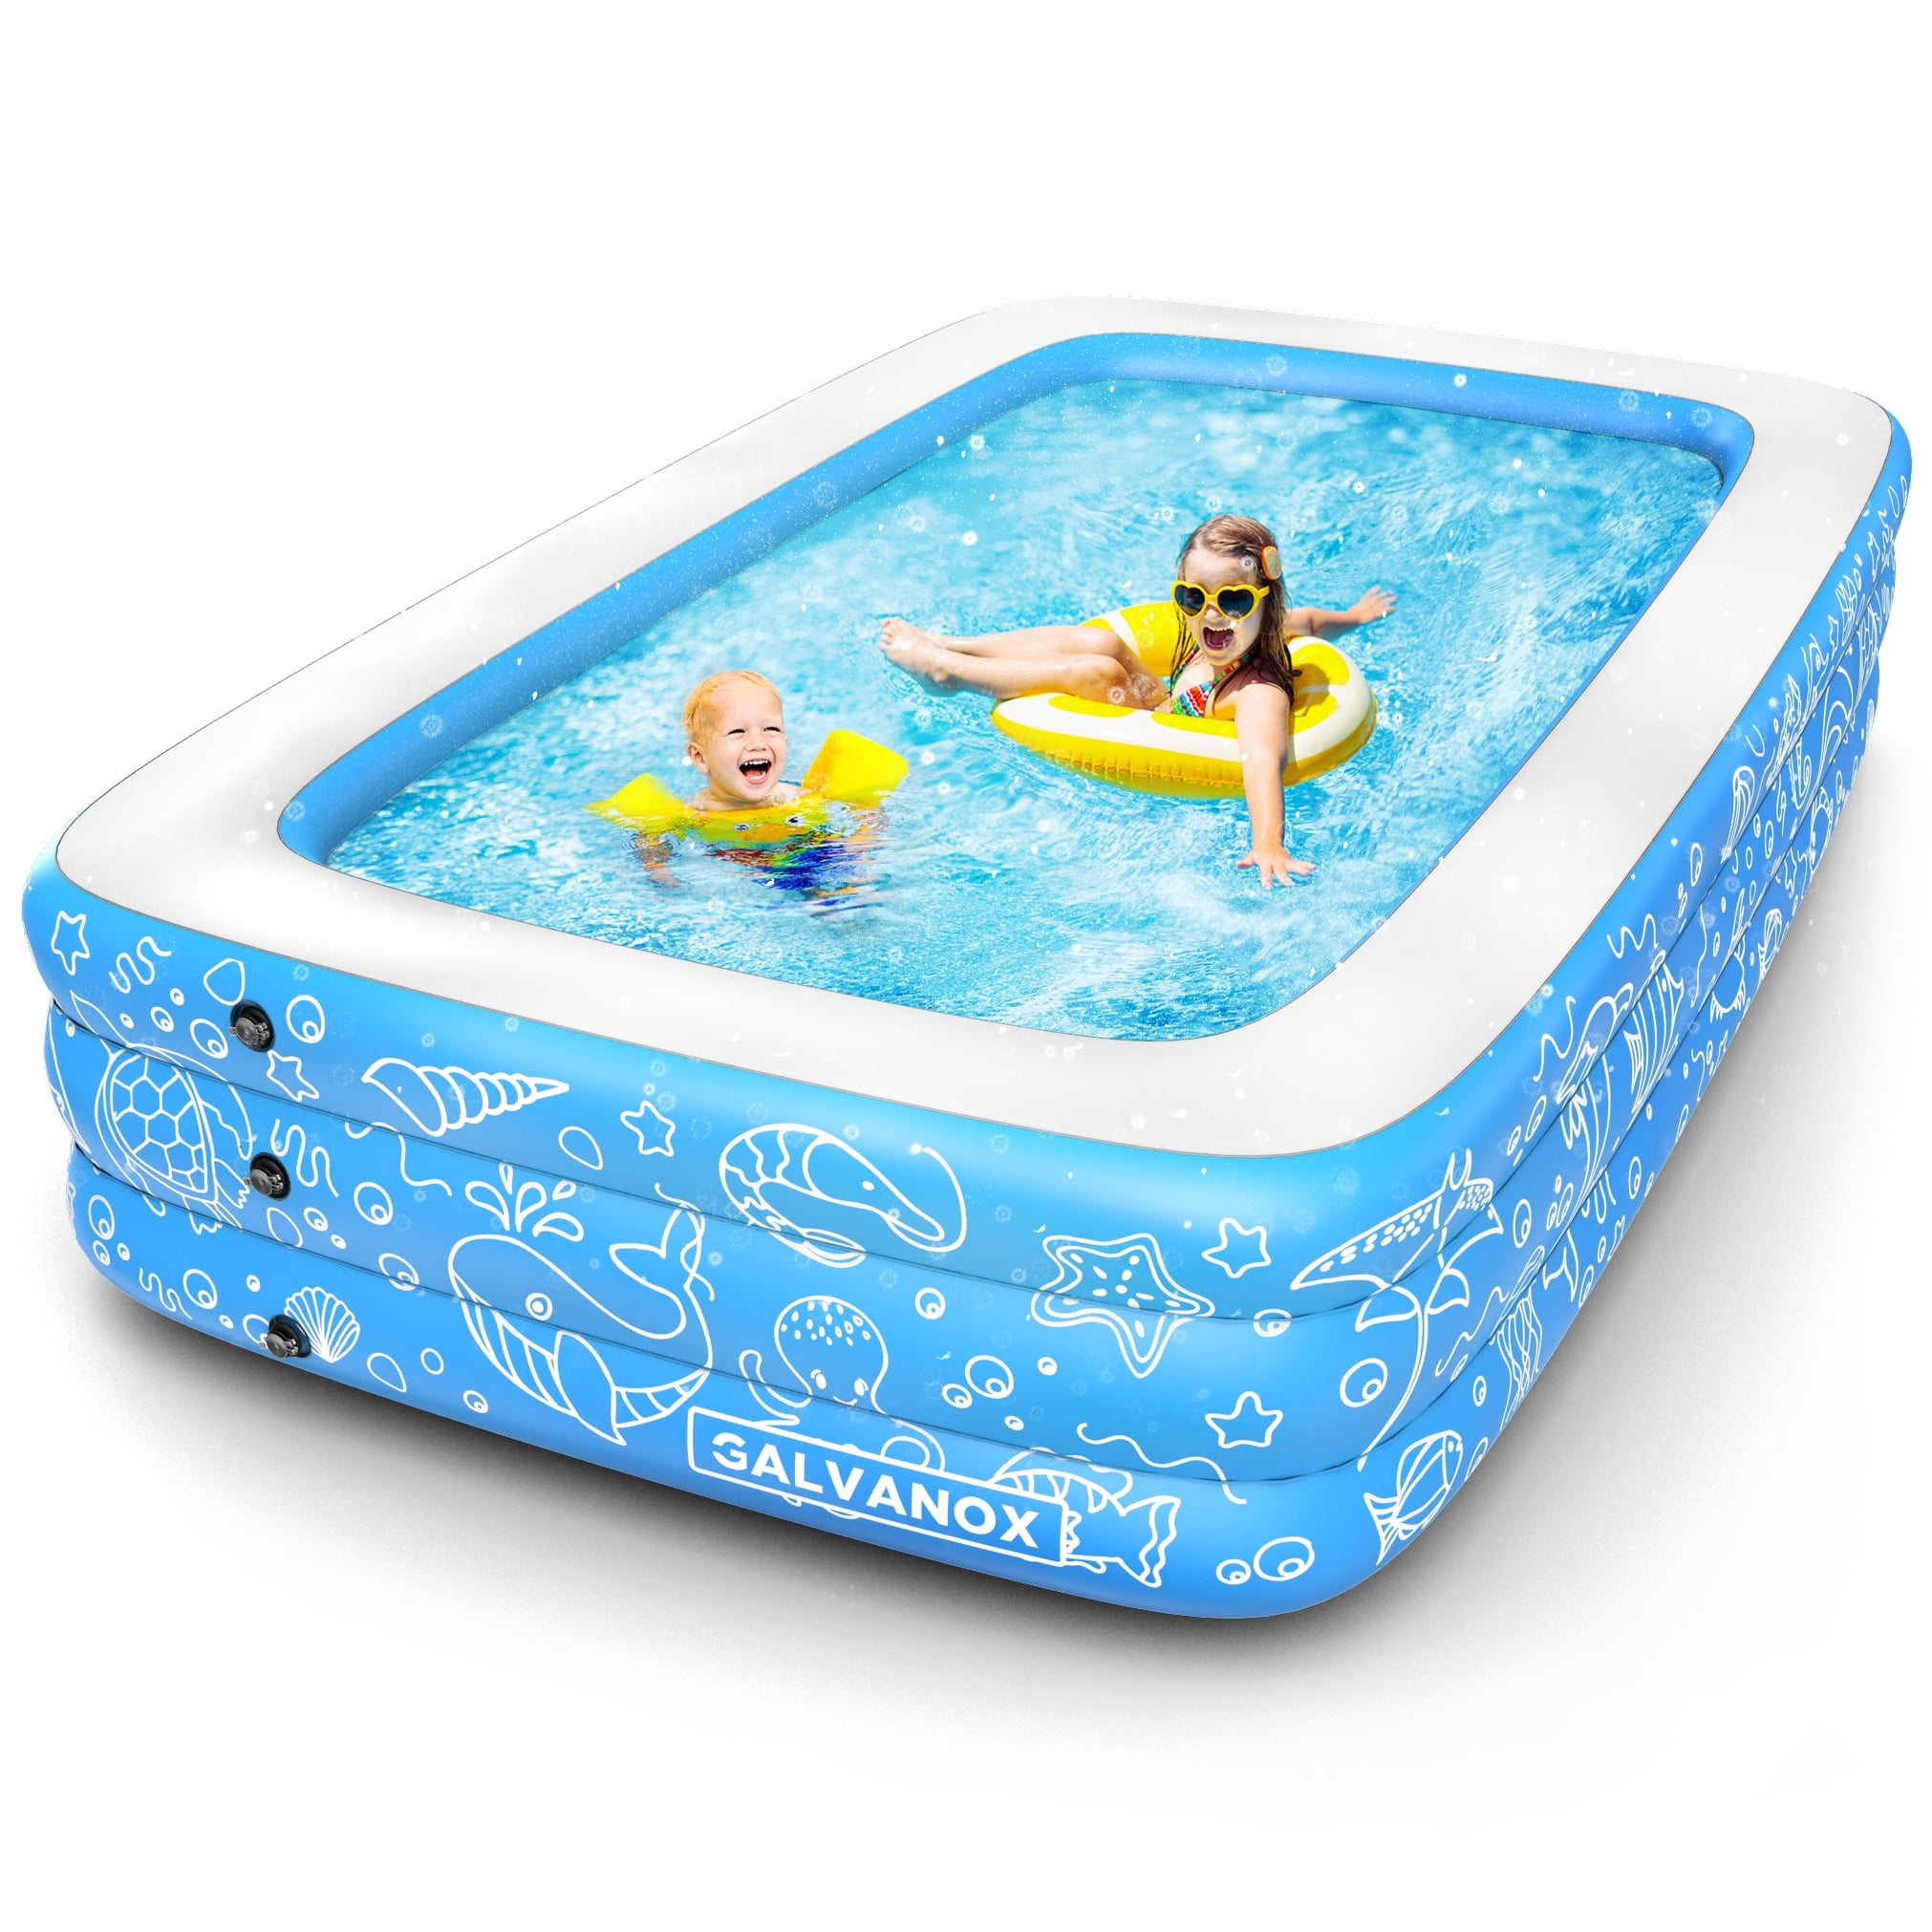 95 Diameter Summer Water Party Height Backyard Creny Family Inflatable Swimming Pool Garden Quick Set Inflatable Pools Above Ground Pool for Kids and Adult x 25 Outdoor